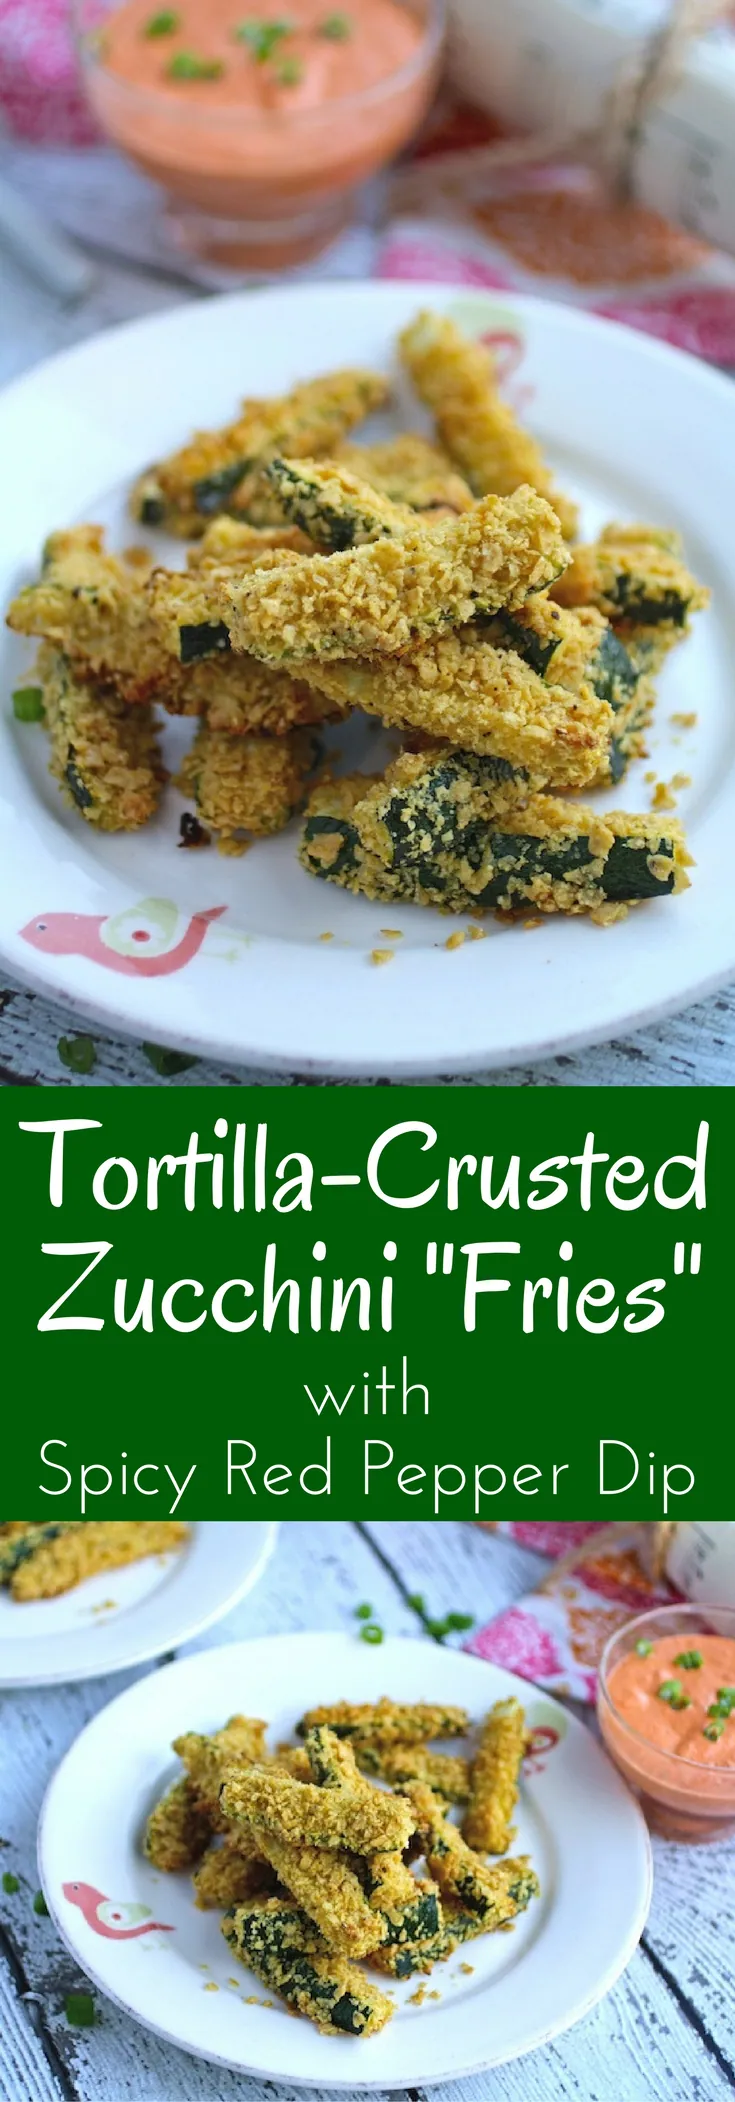 Tortilla-Crusted Zucchini "Fries" with Spicy Red Pepper Dip are a great snack! You'll love this gluten-free treat!